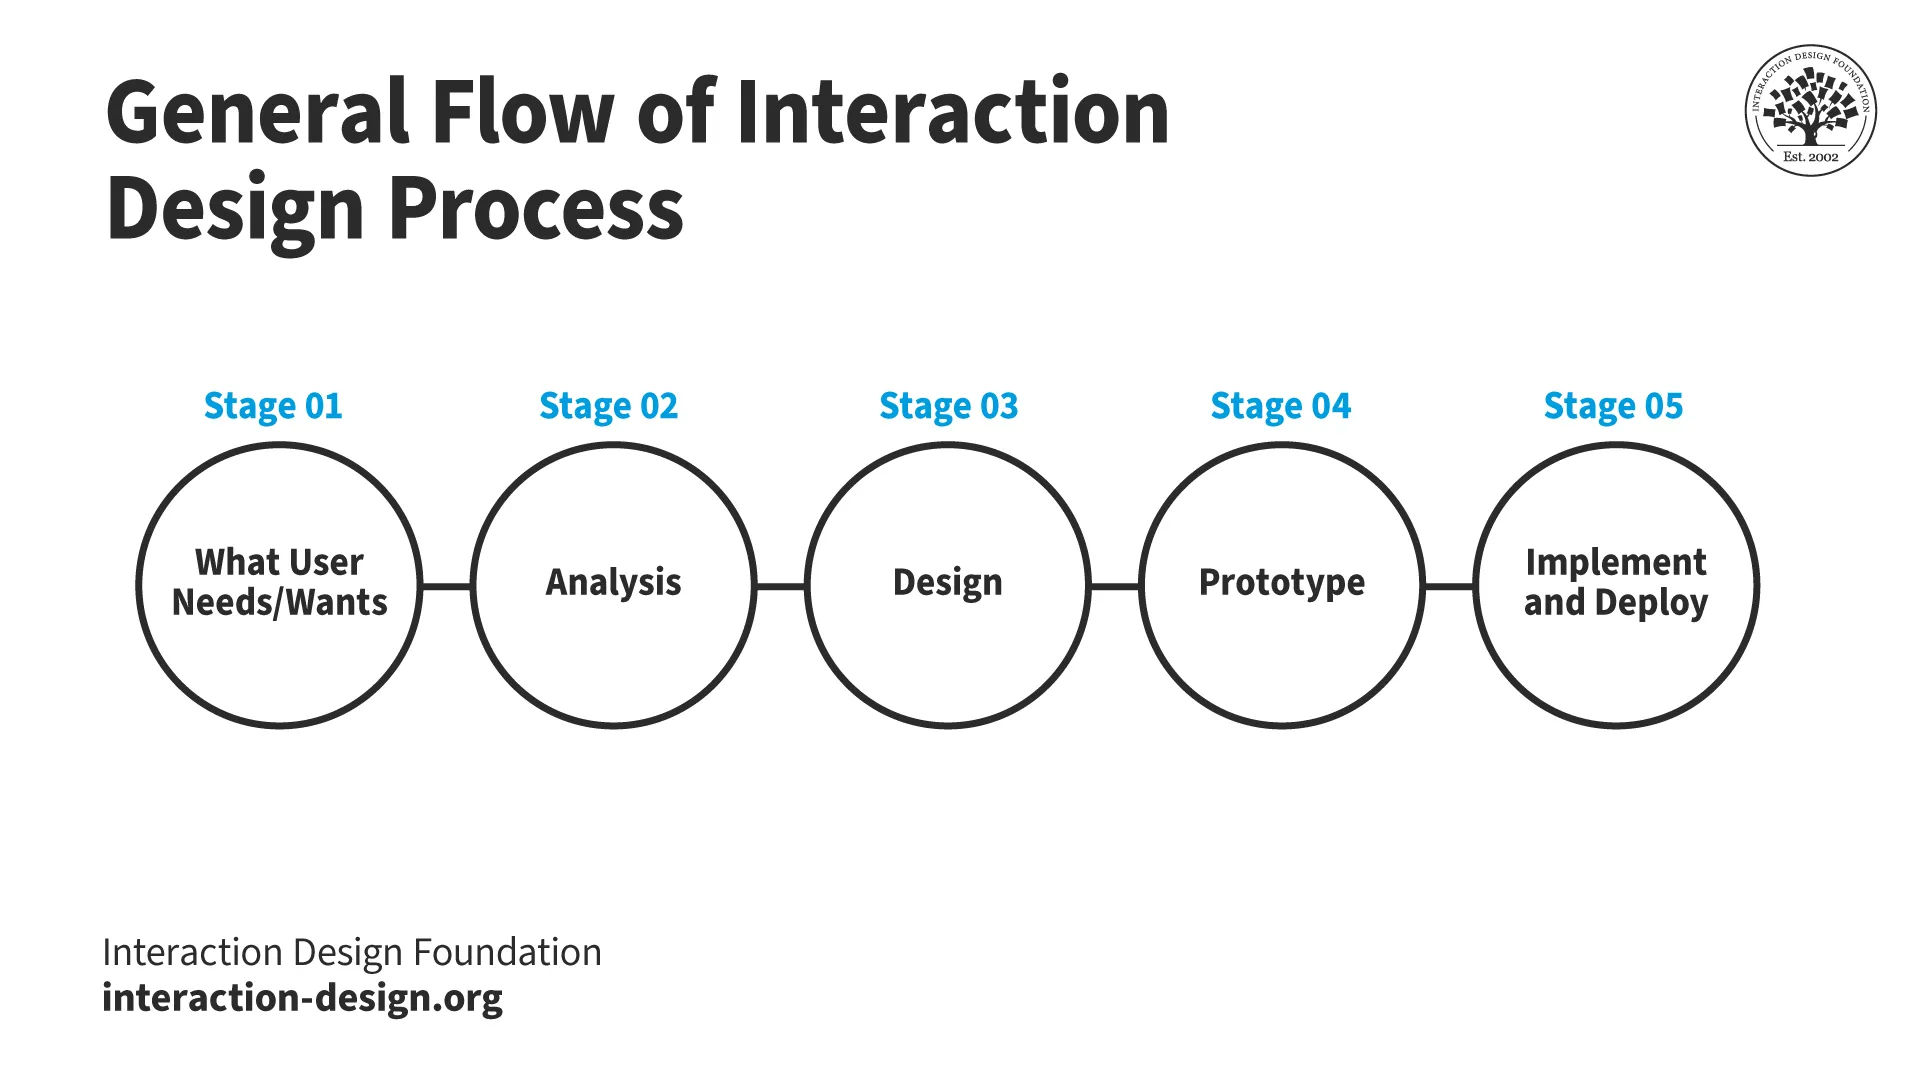 A diagram showing the general flow of the interaction design process.